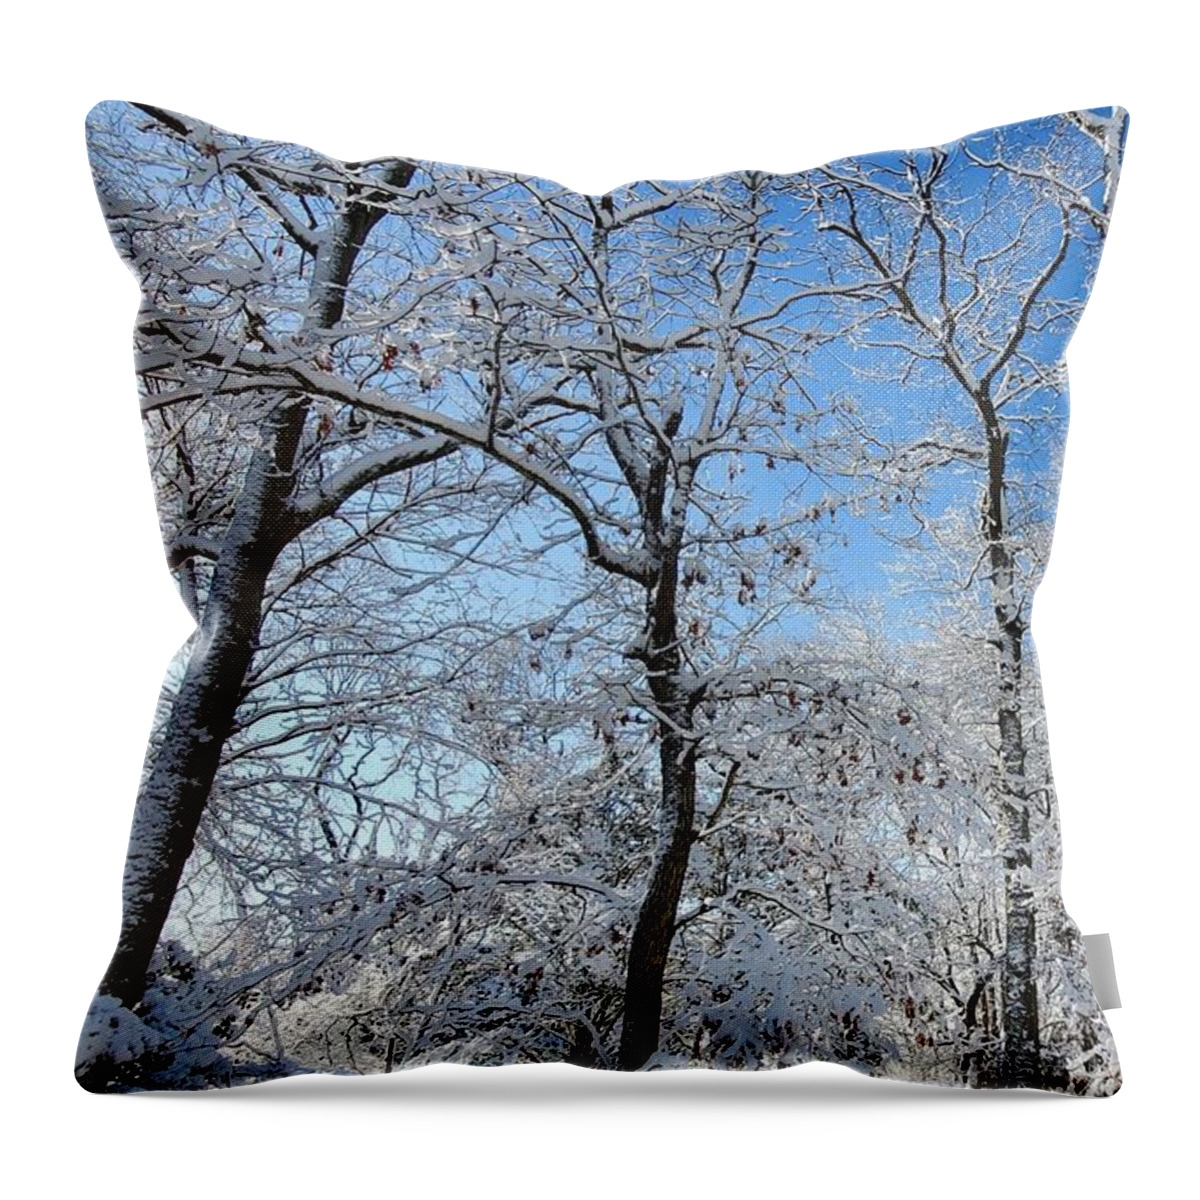 Snow Covered Throw Pillow featuring the photograph Snowy Trees and Blue Sky by Stacie Siemsen